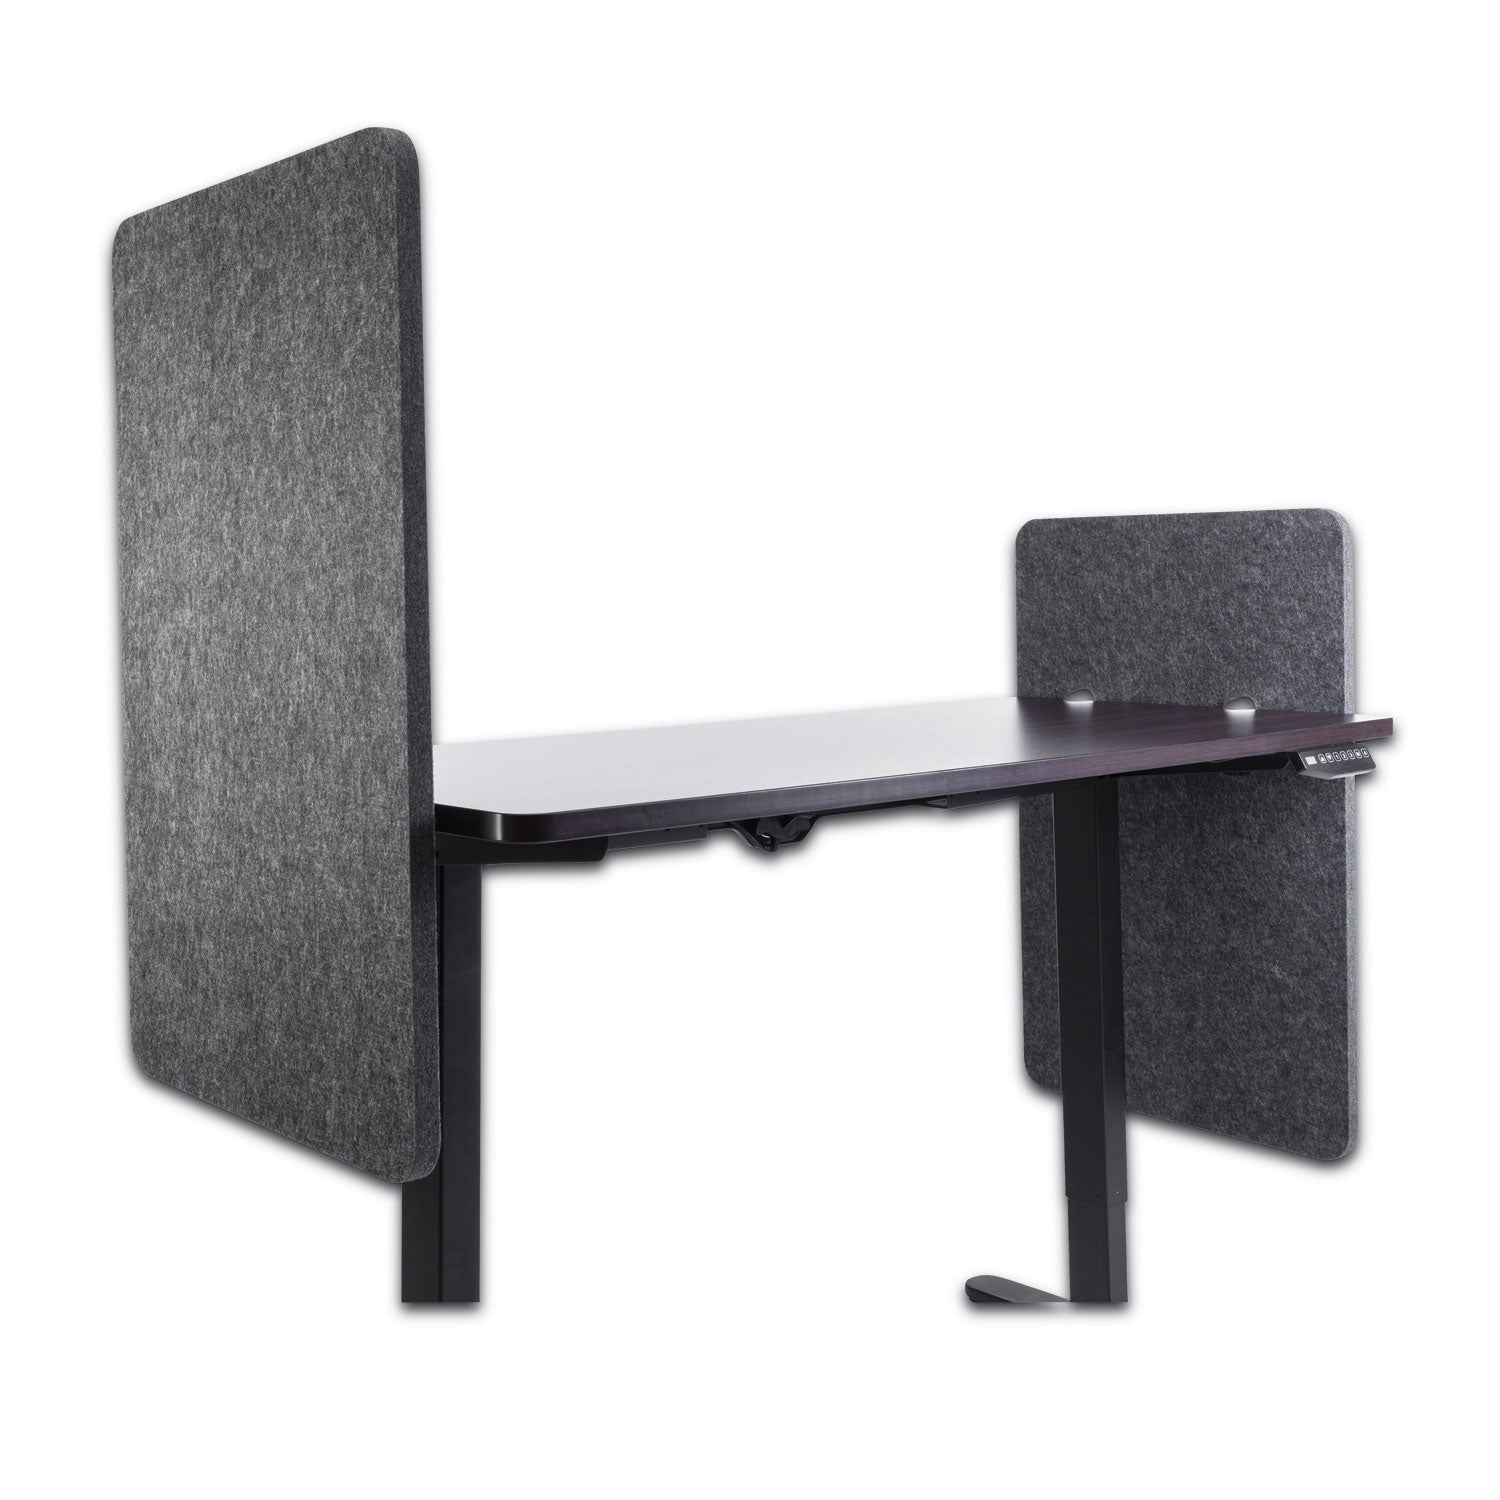 desk-modesty-adjustable-height-desk-screen-cubicle-divider-and-privacy-partition-235-x-1-x-36-polyester-ash_gn1ludm24361a - 4